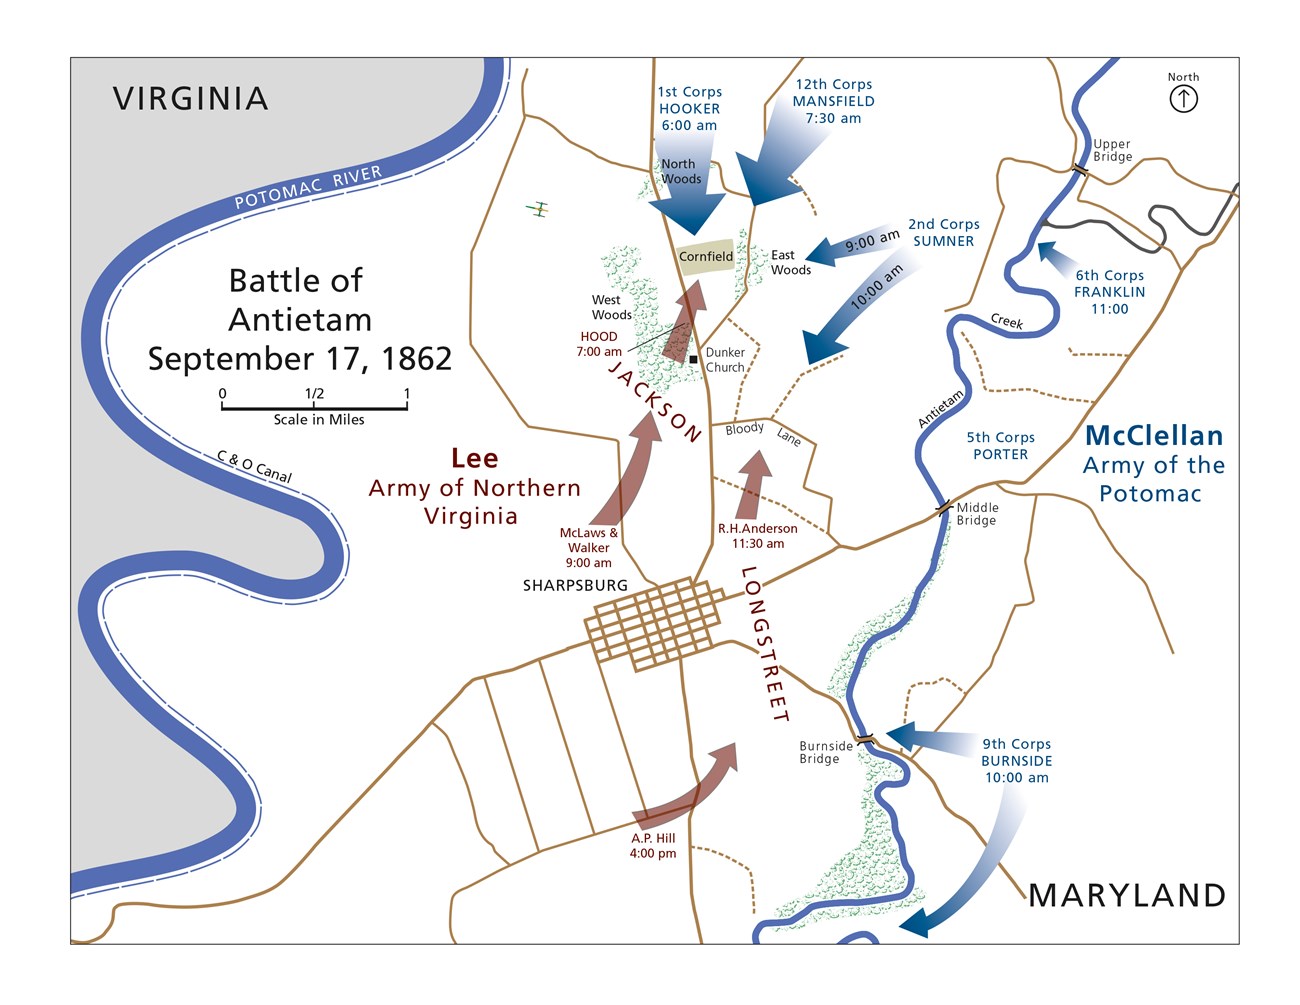 Overview map of the Battle of Antietam